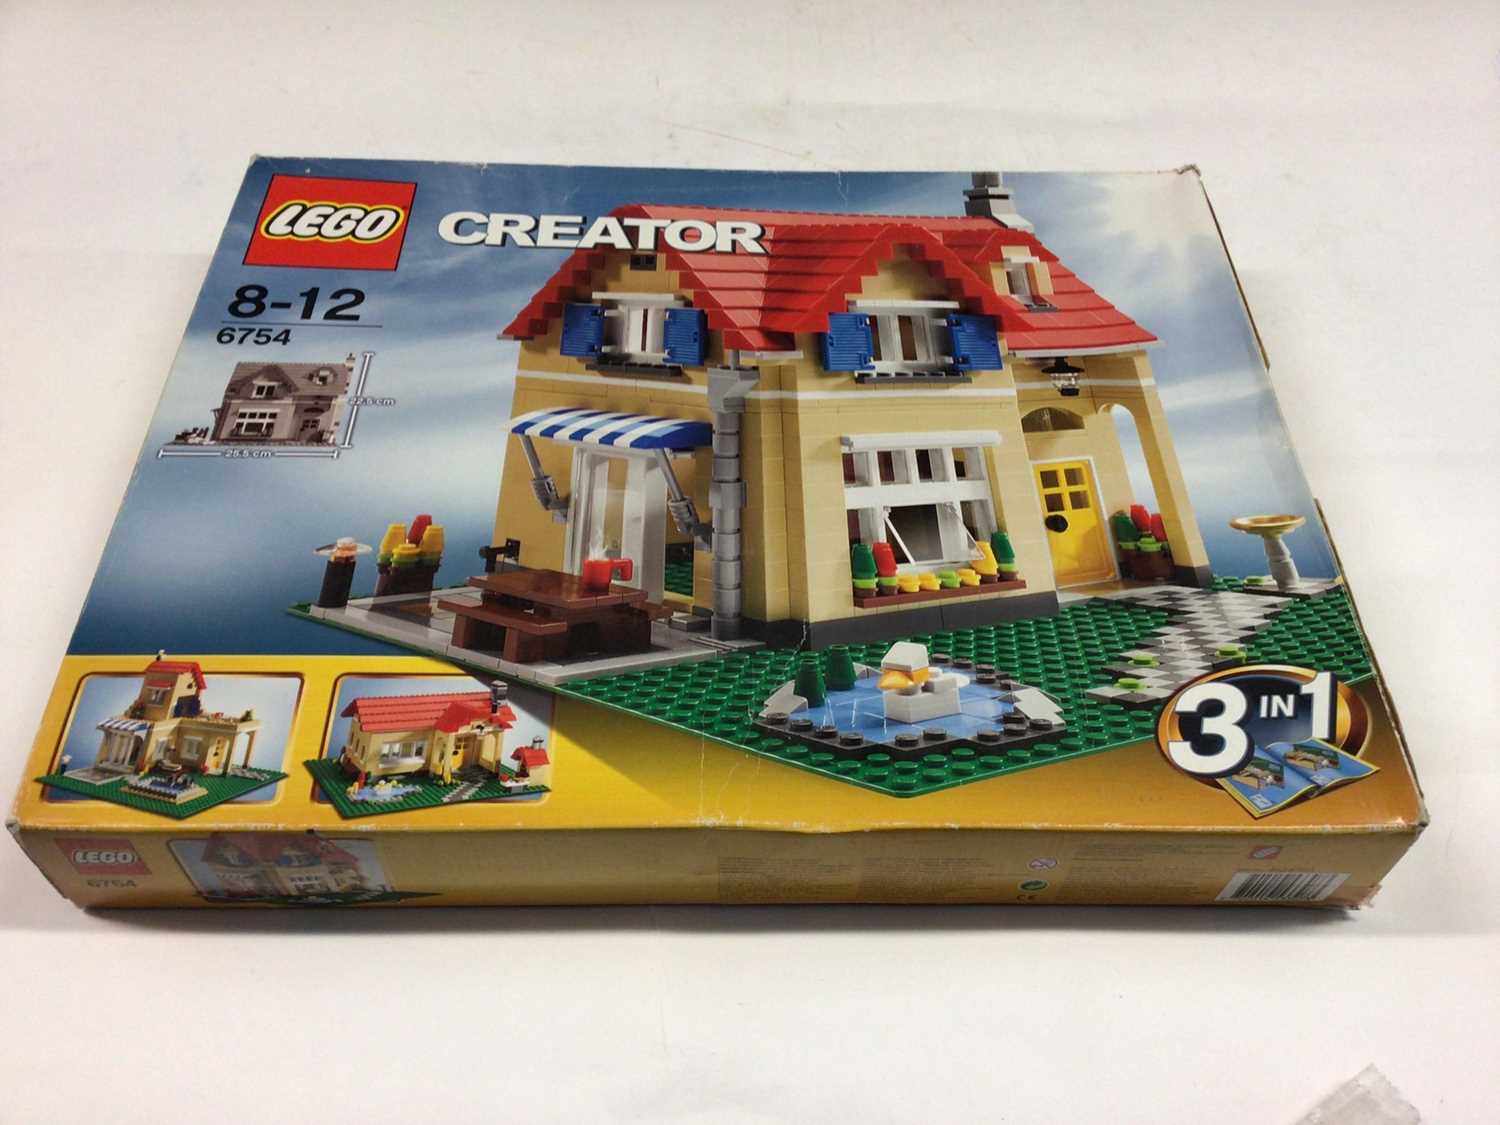 Lot 11 - Lego Creator 6754 Family House 3 in 1, with